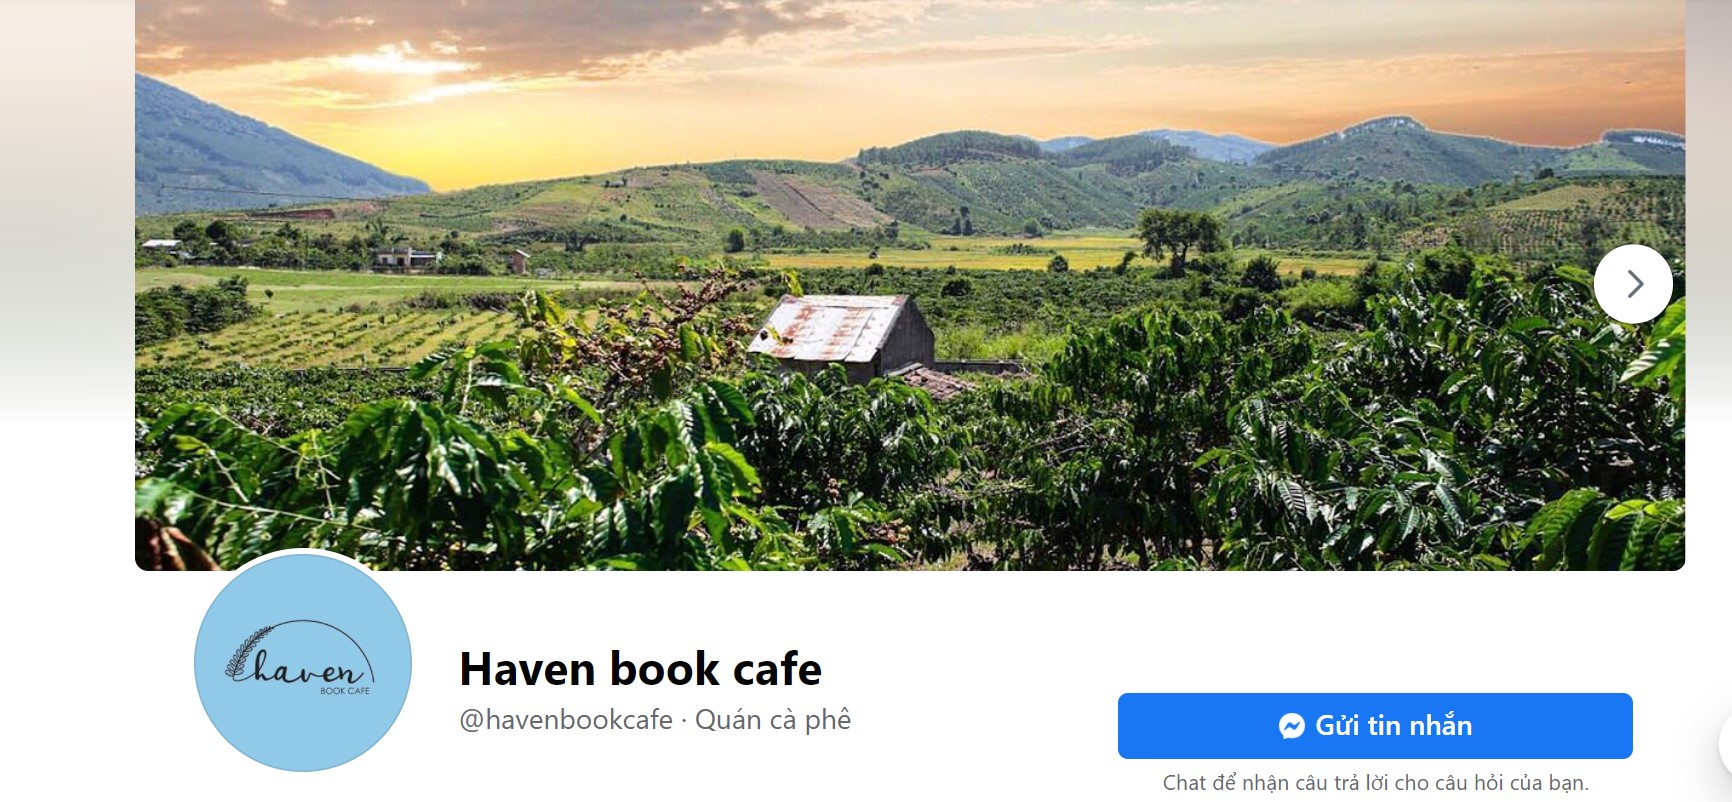 Haven book cafe